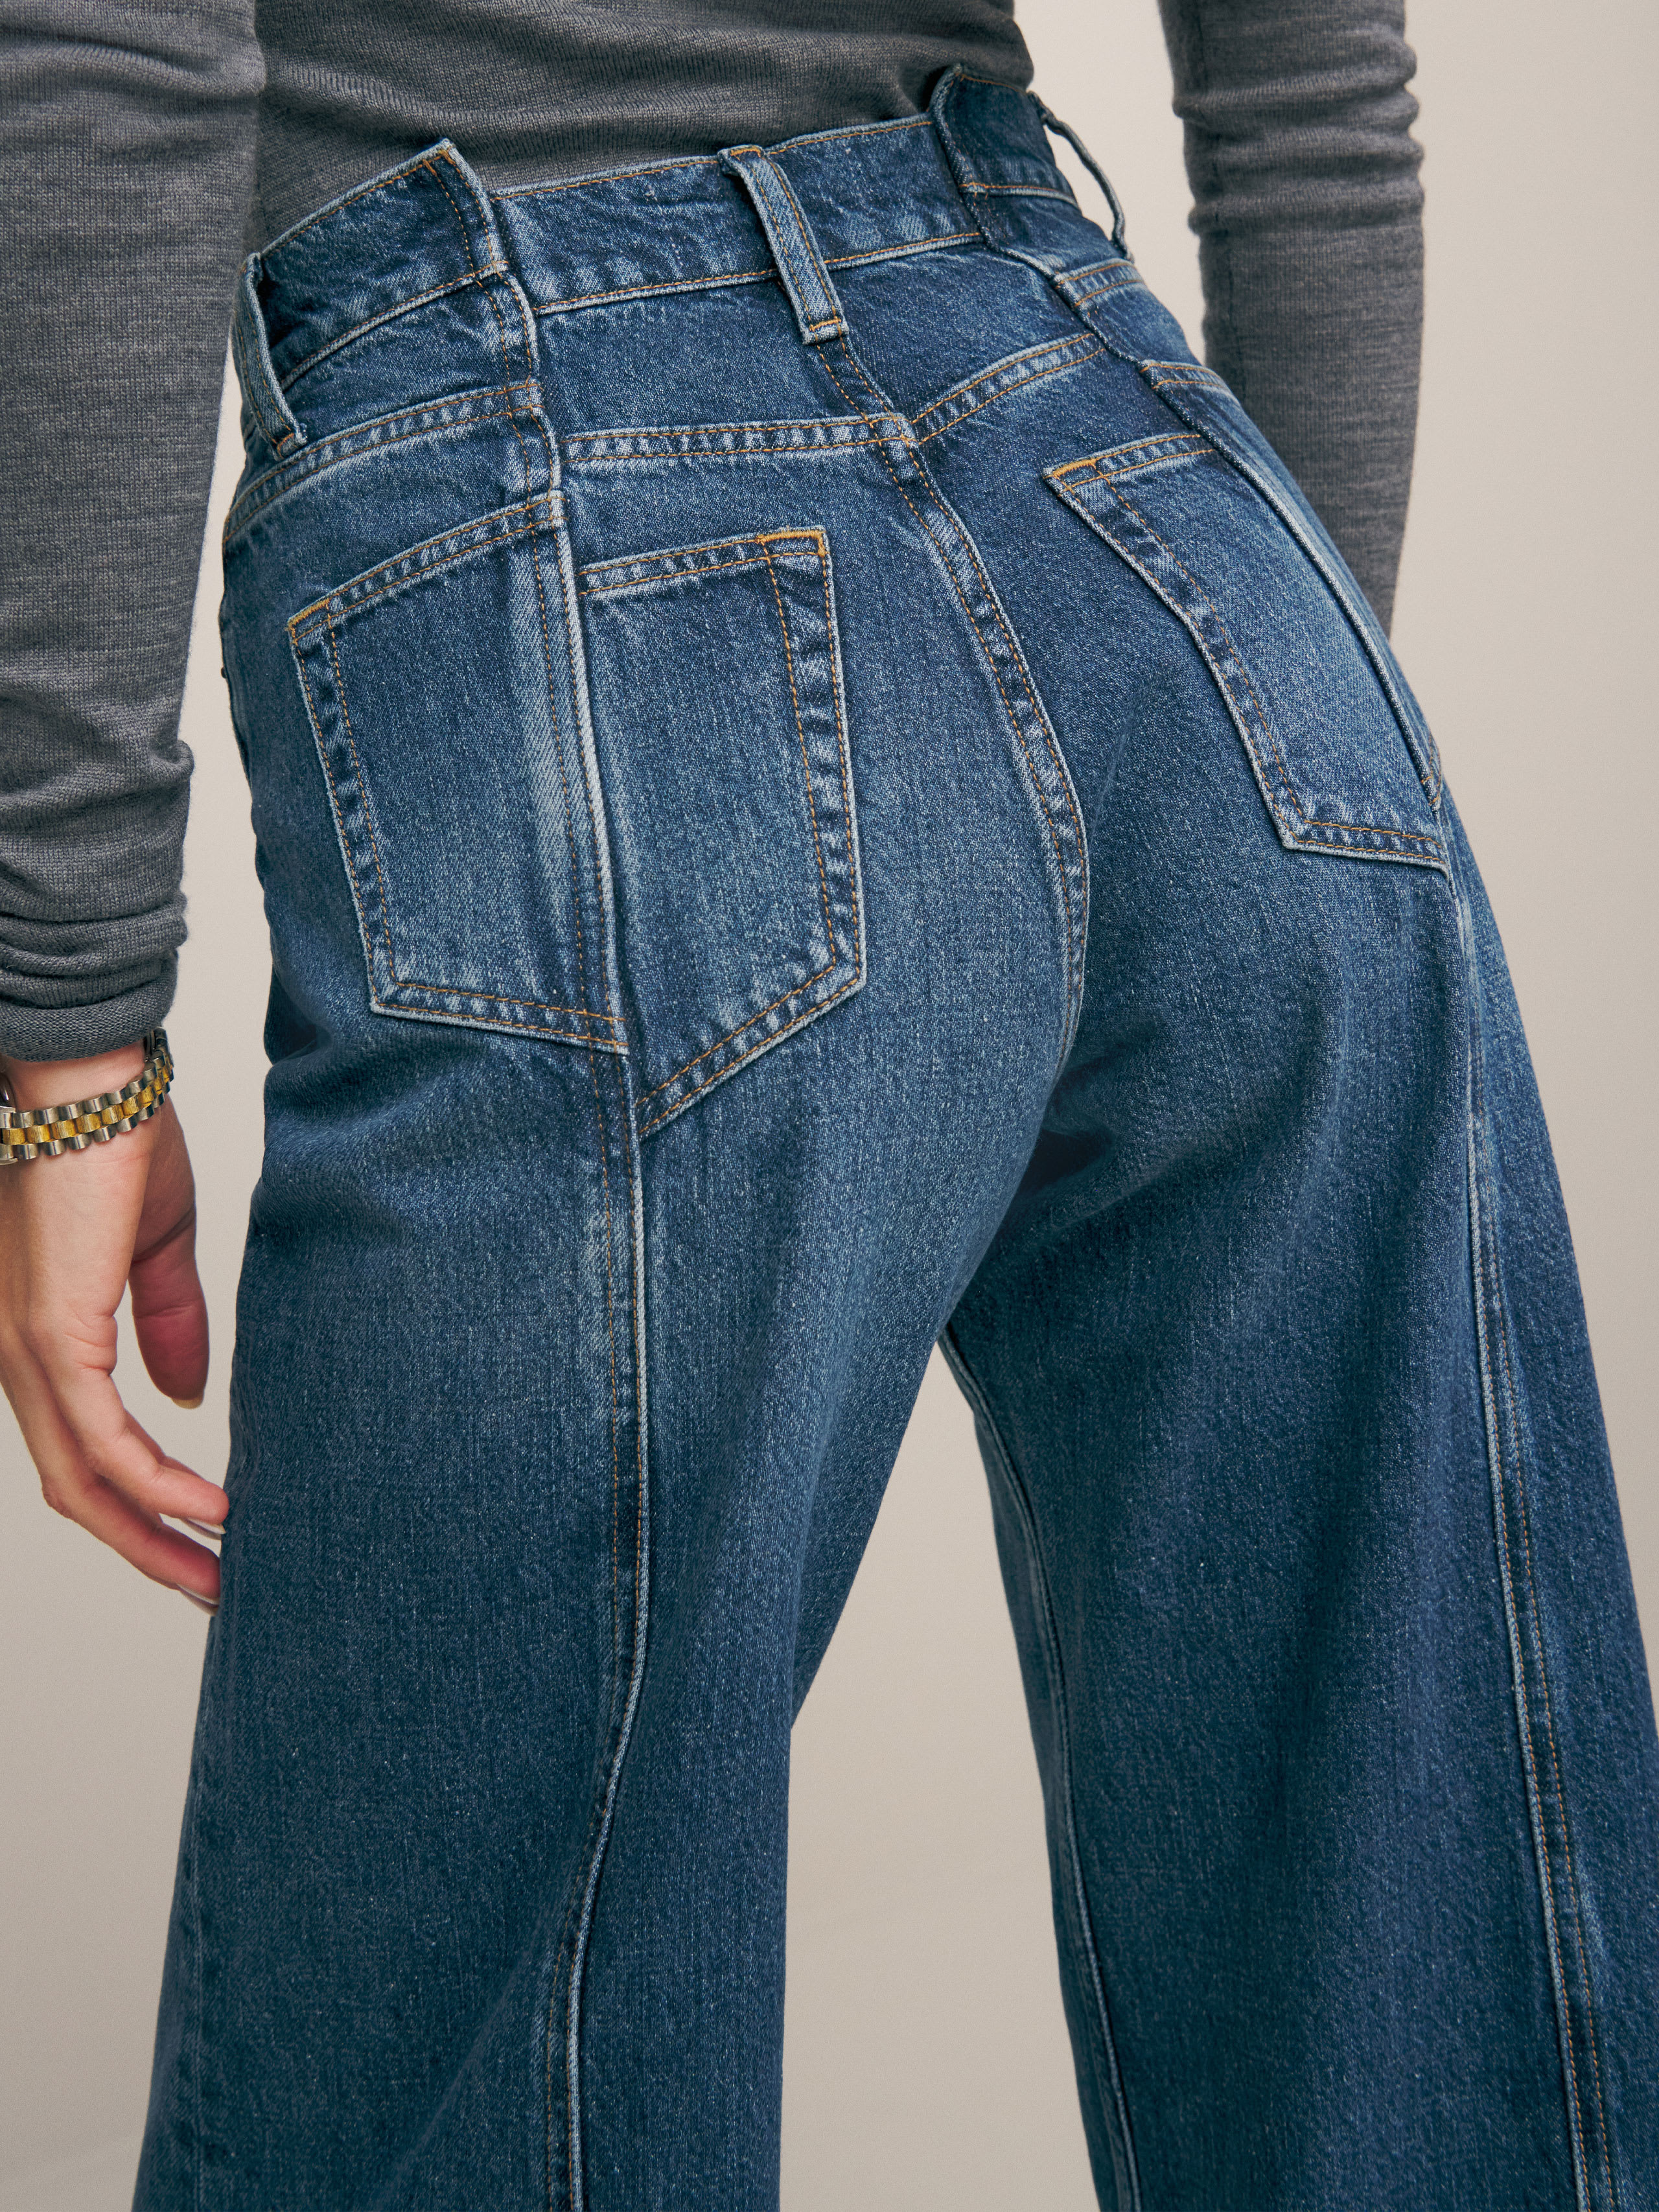 Reformation Cary High Rise Slouchy Wide Leg Jeans In Cabo Reworked